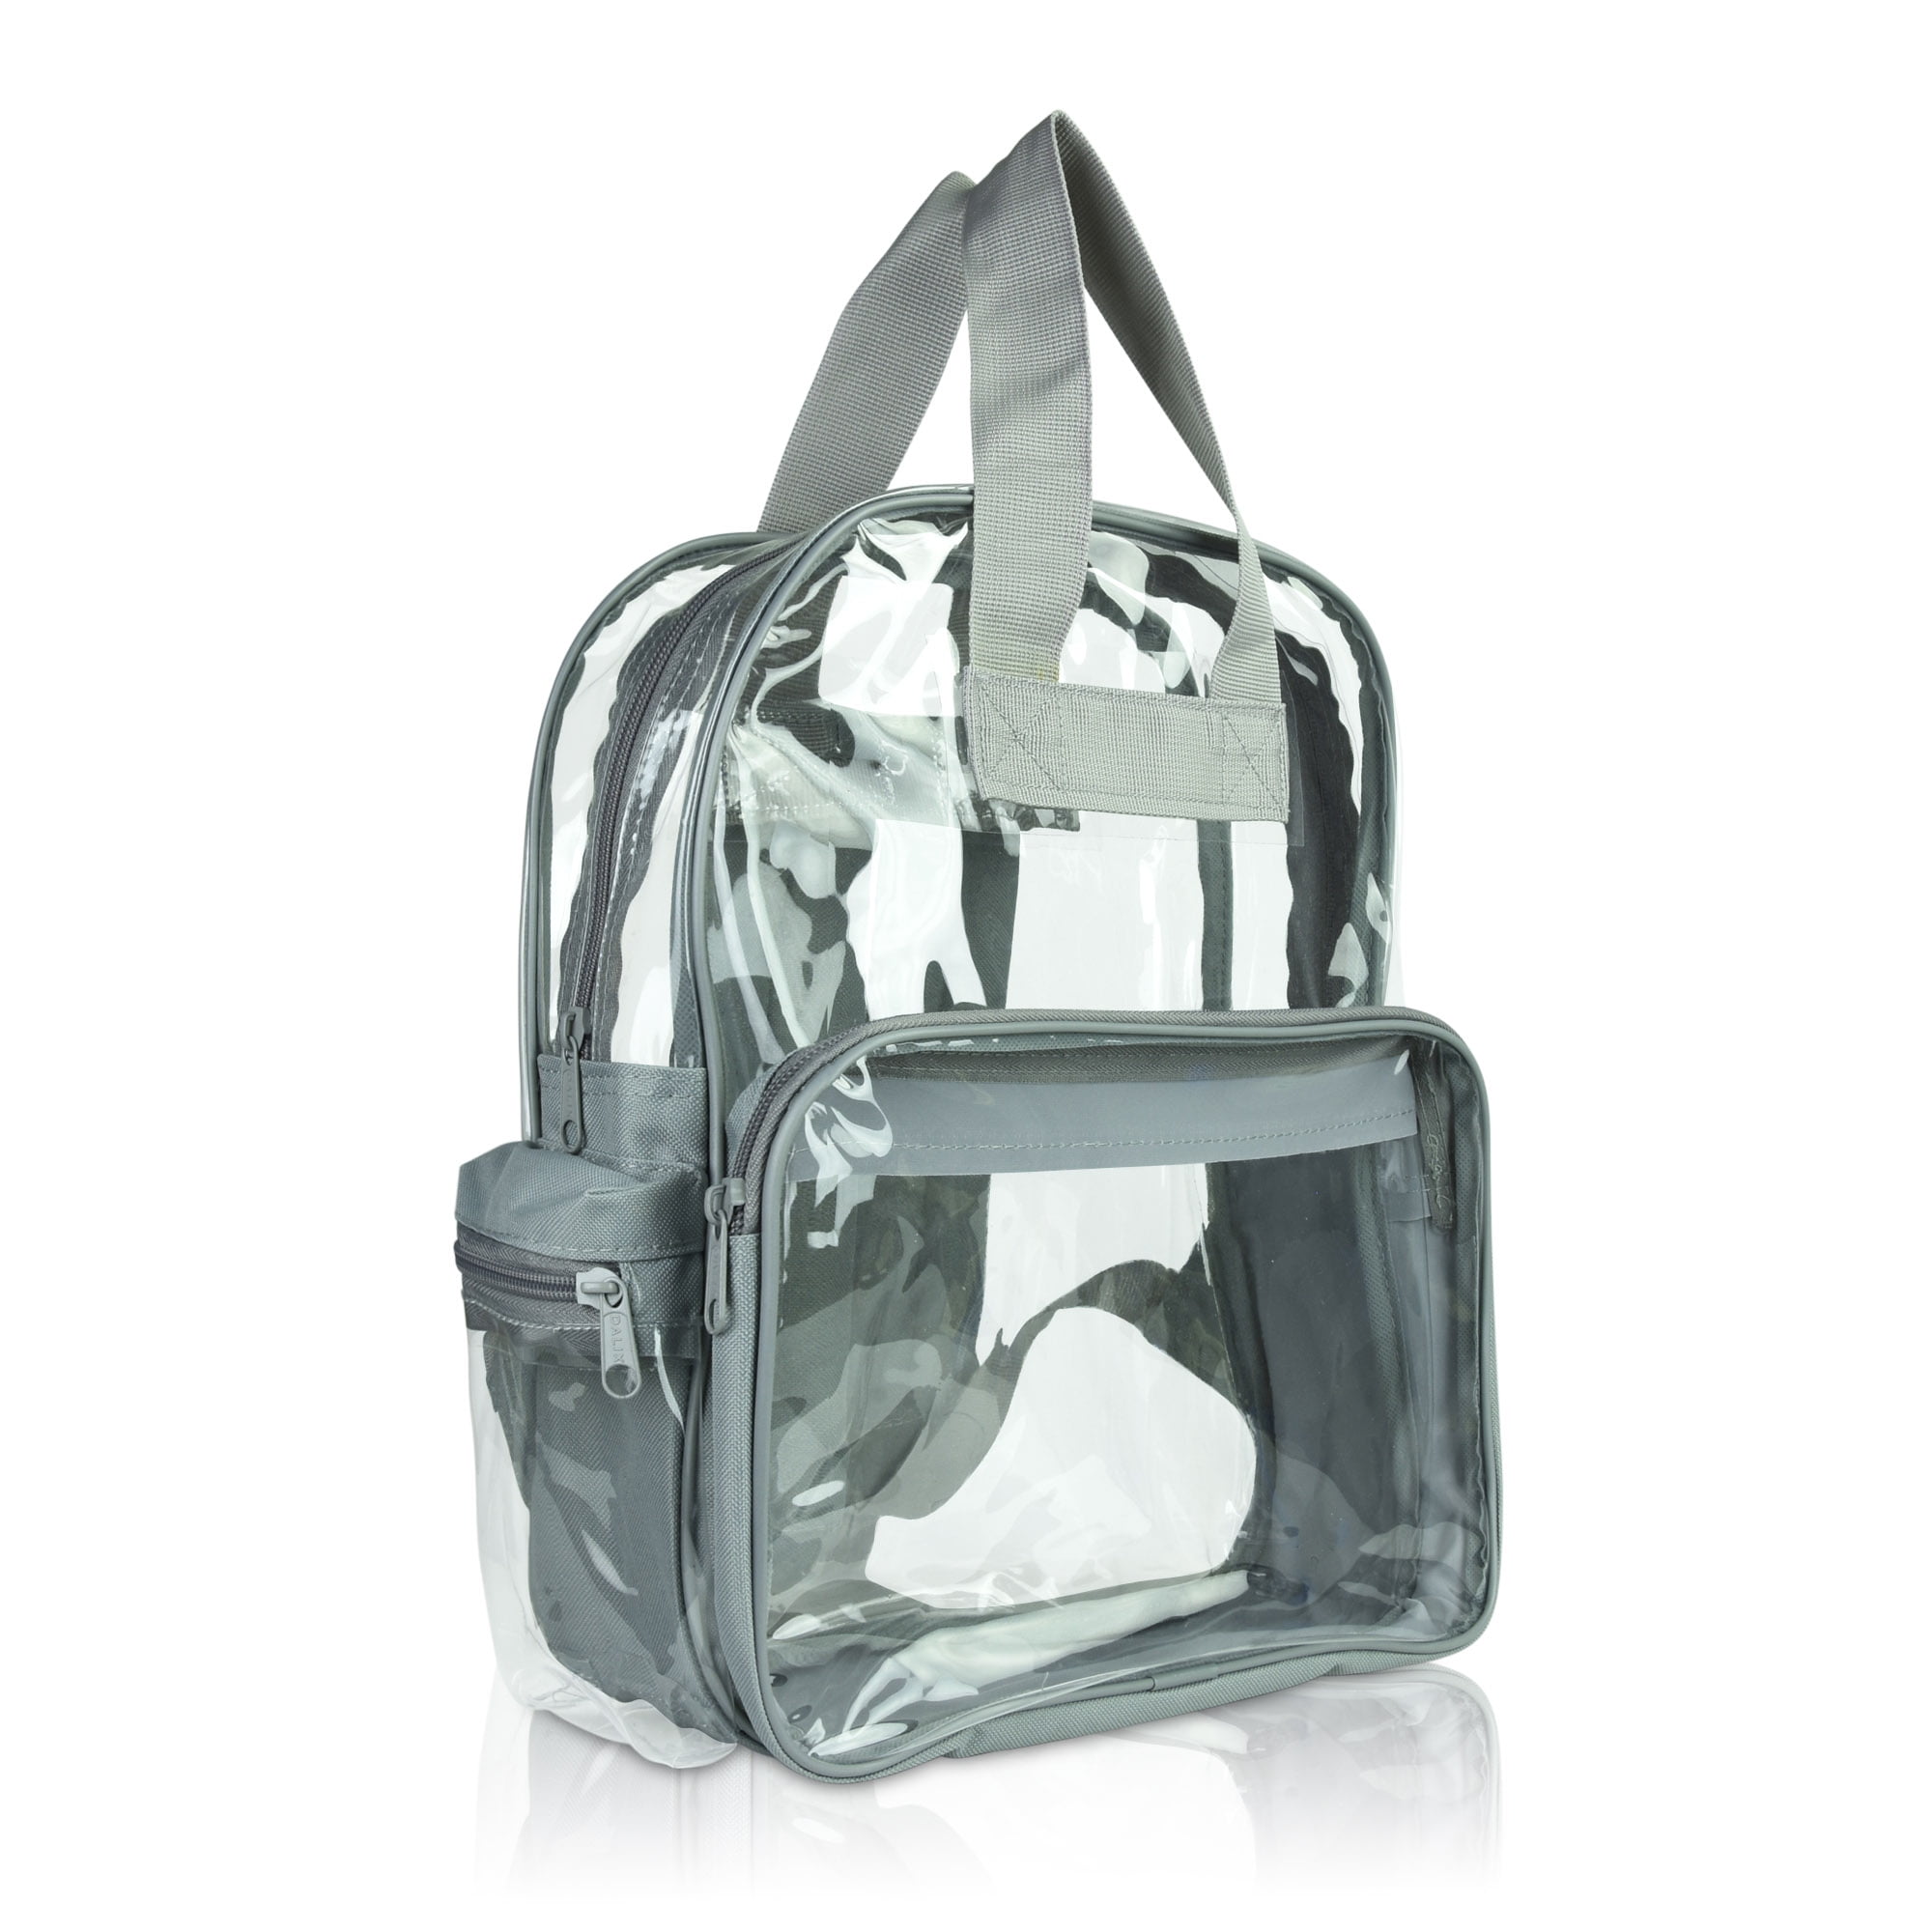 DALIX CLEAR BACKPACK TRANSPARENT PVC SCHOOL SECURITY GOLD FREE SHIPPING